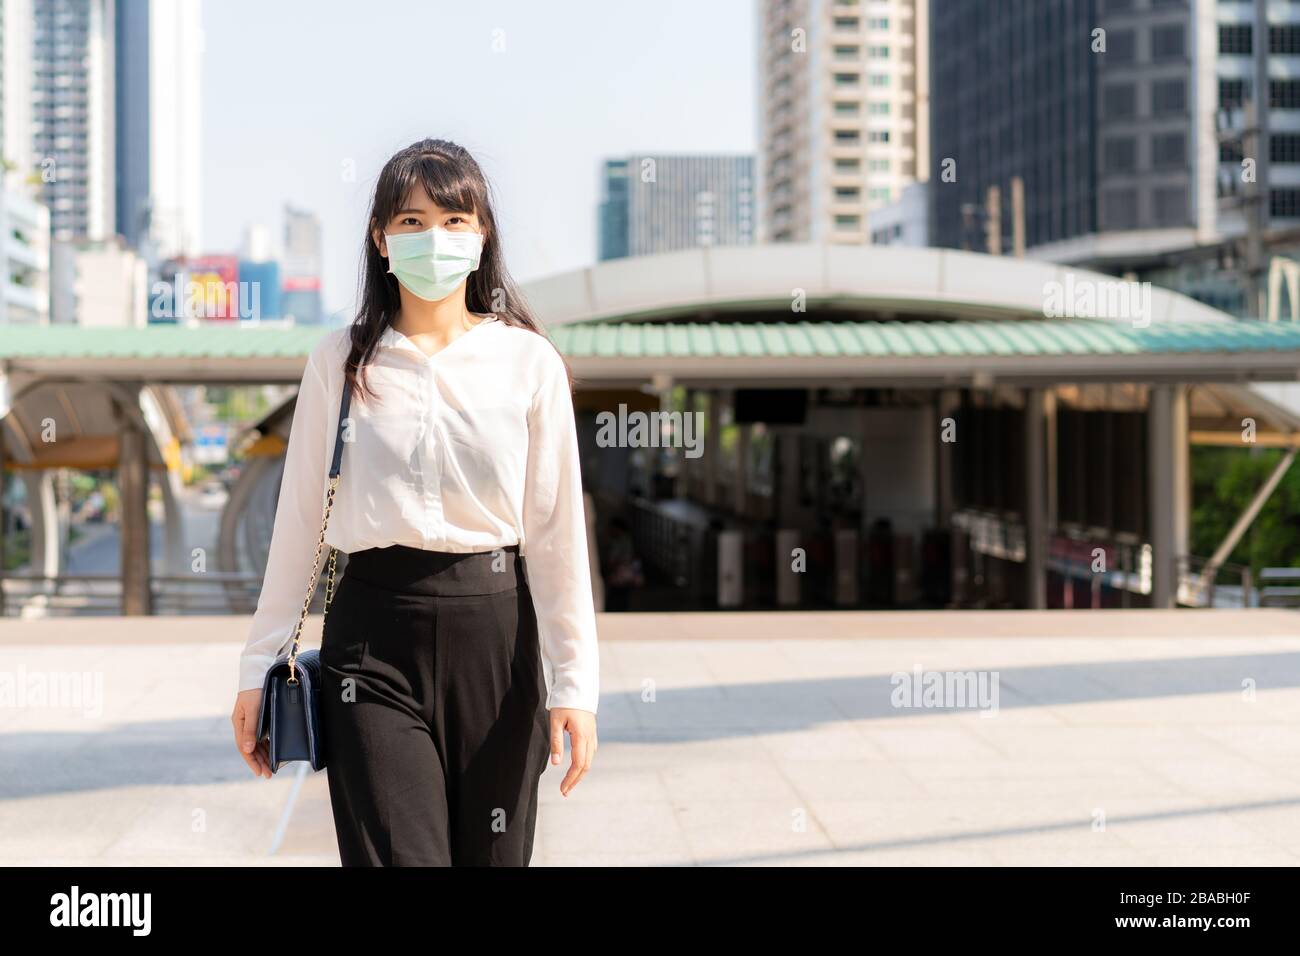 Young stress Asian businesswoman in white shirt going to work in pollution city she wears protection mask prevent PM2.5 dust, smog, air pollution and Stock Photo